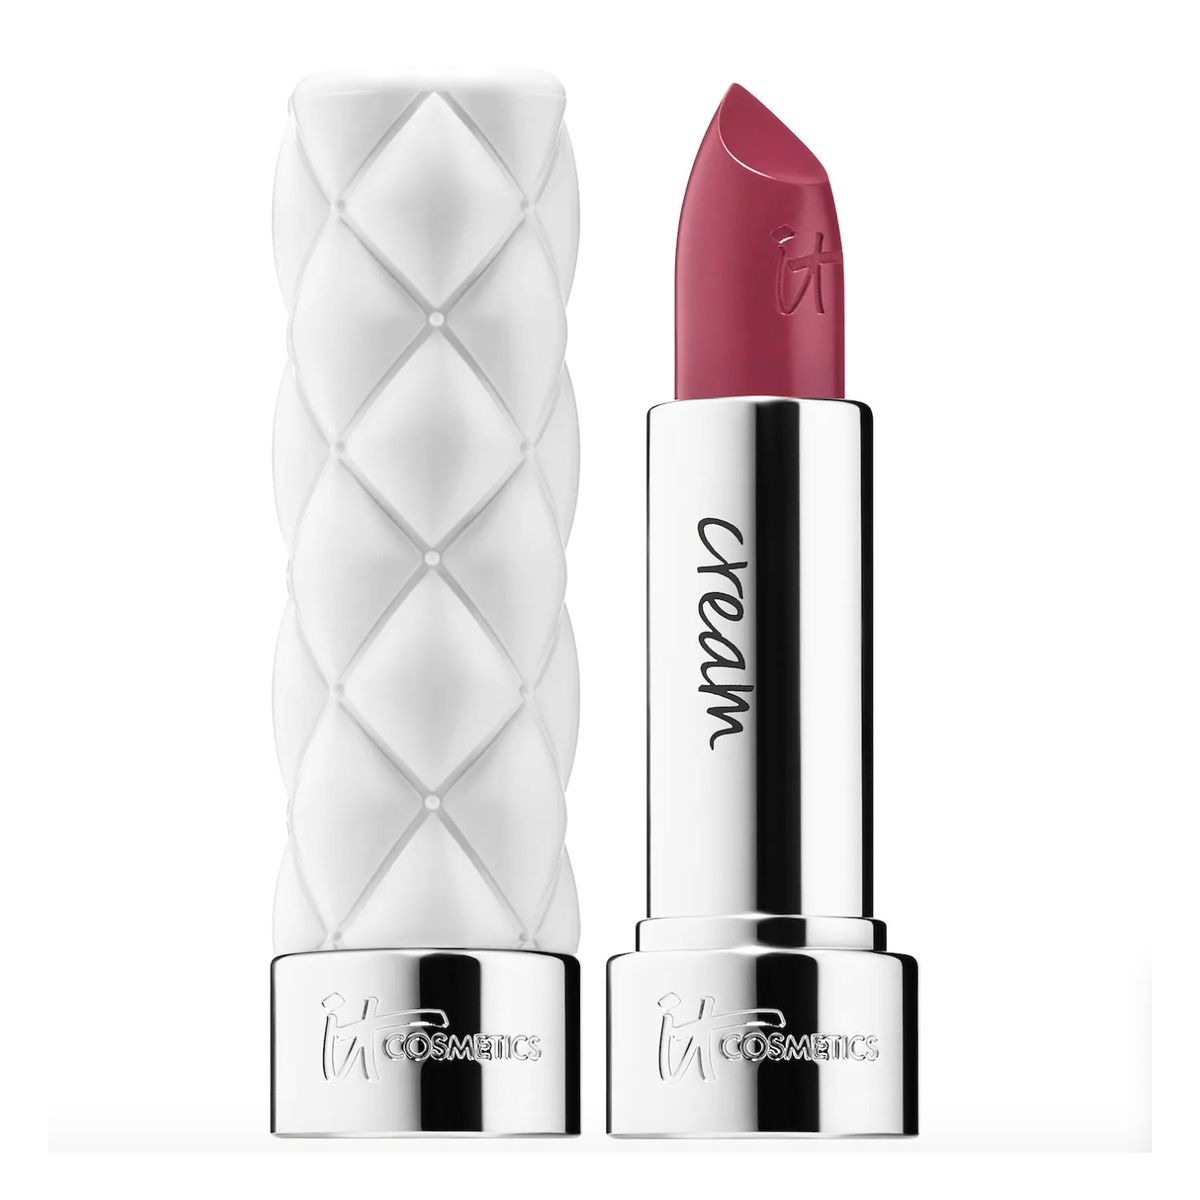 IT Cosmetics Pillow Lips Collagen-Infused Lipsticks Like a Dream